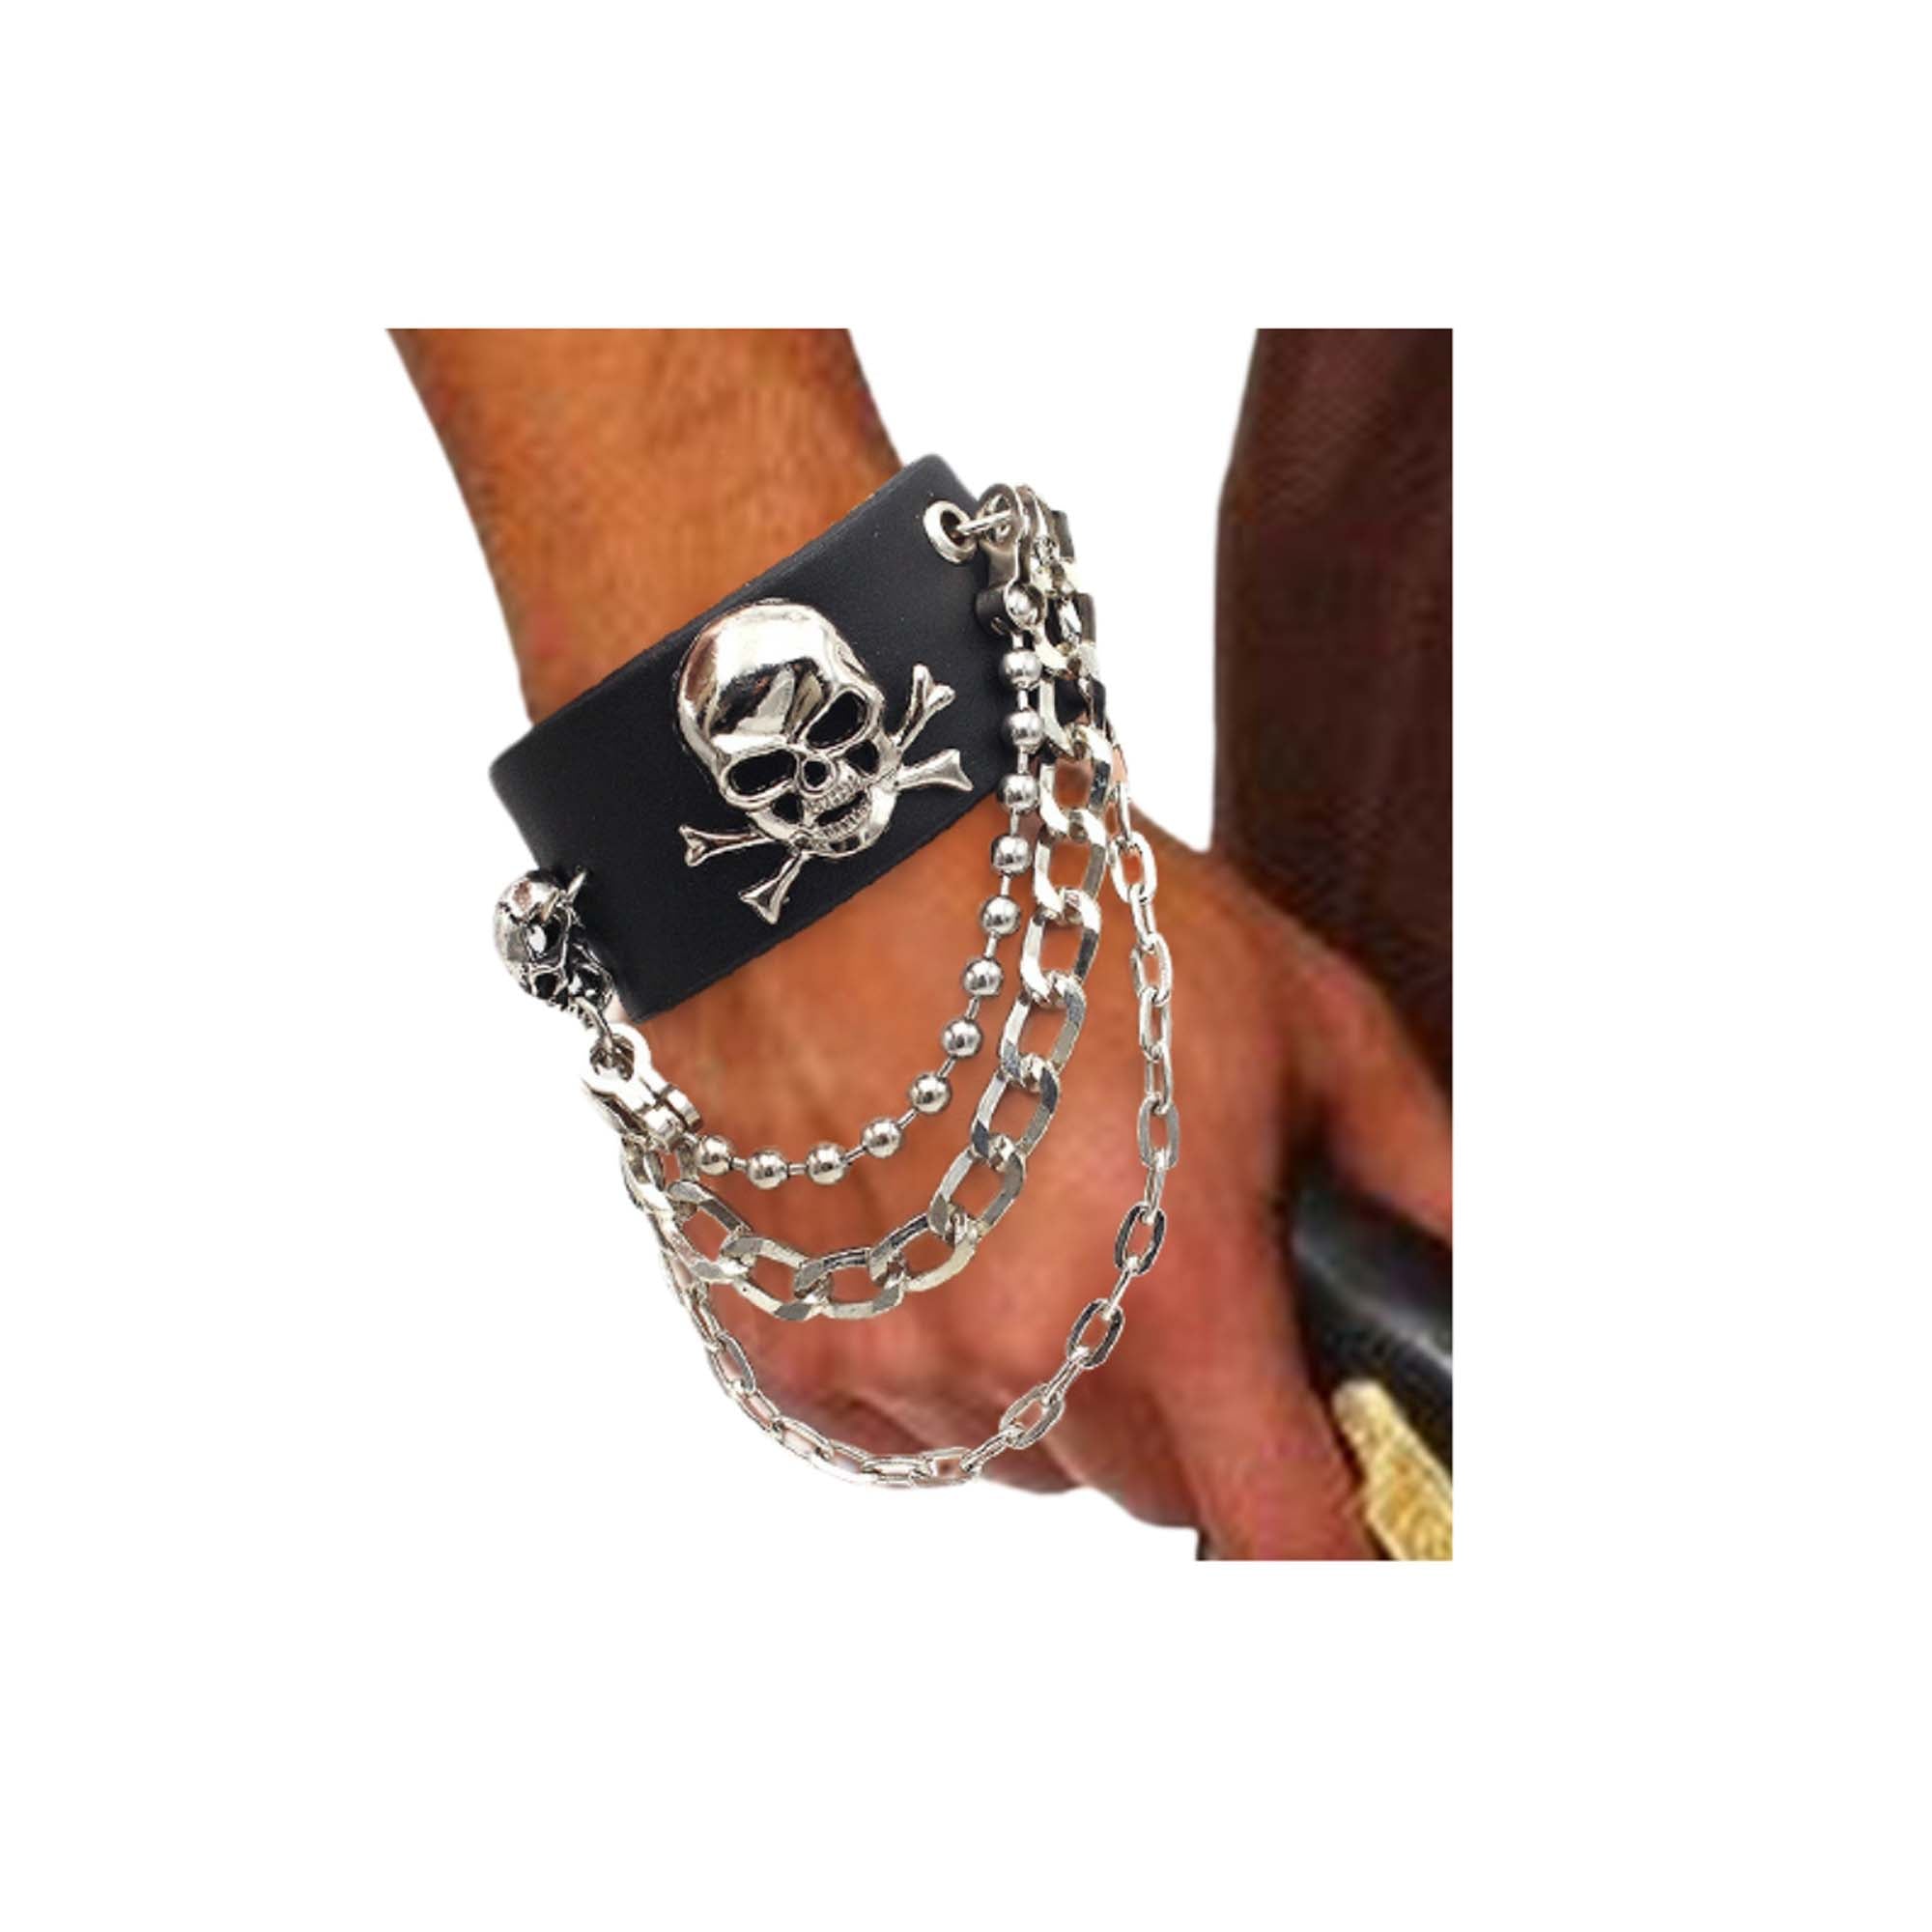 Leatherlike Skull Wristband for Adults, 1 Count